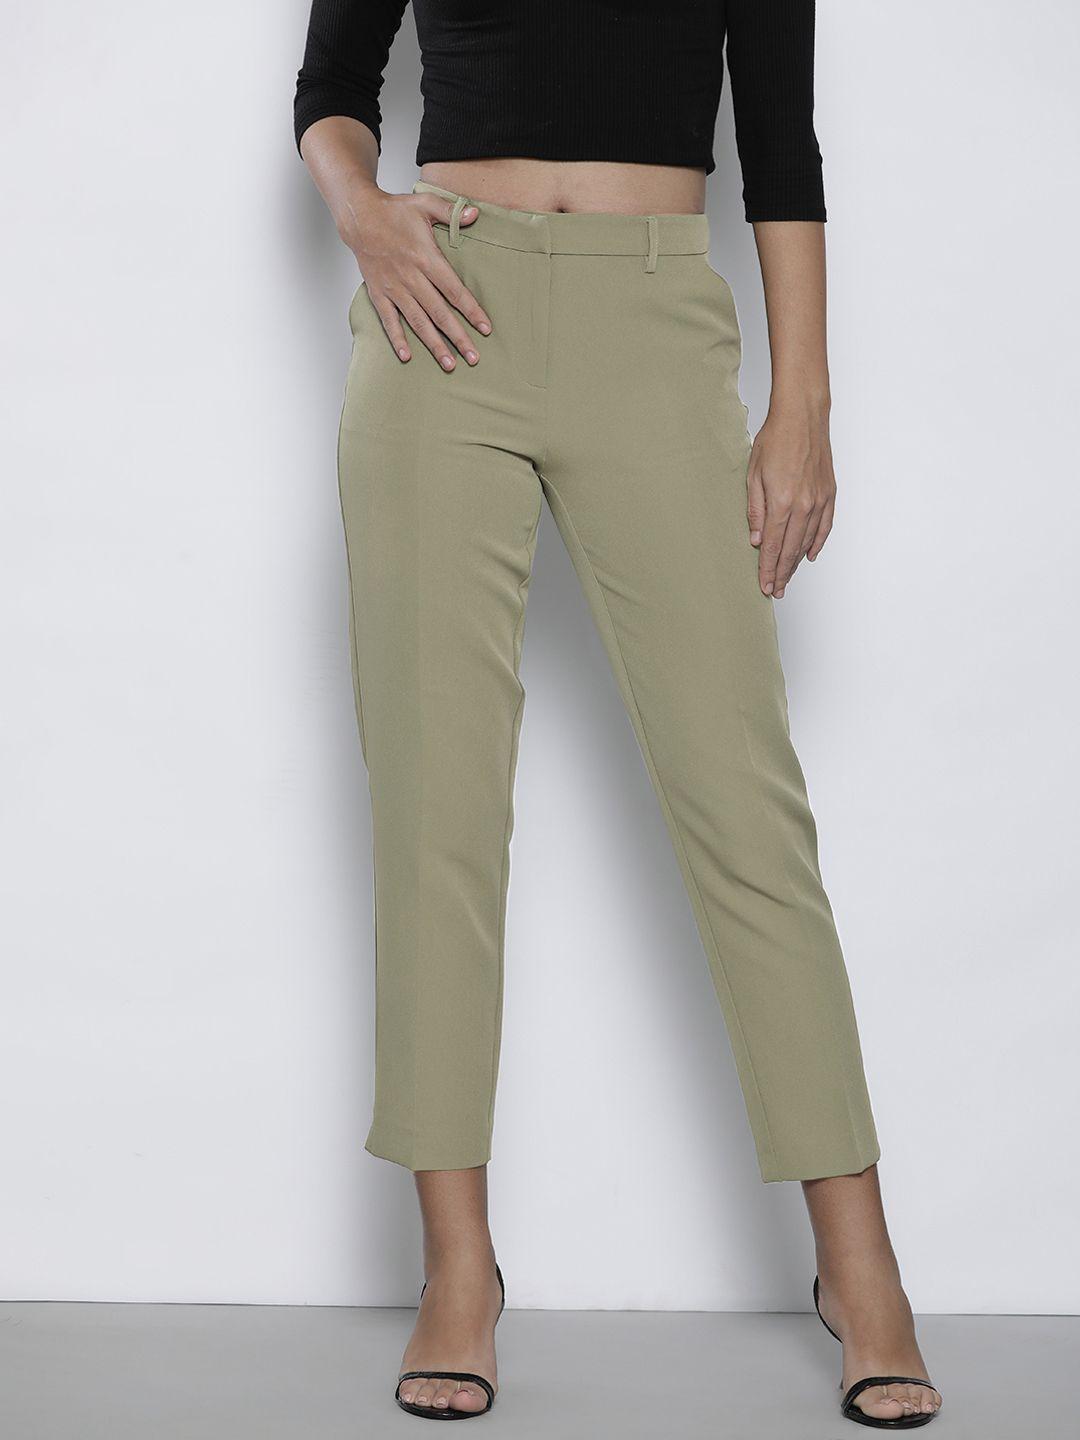 dorothy perkins women cropped trousers